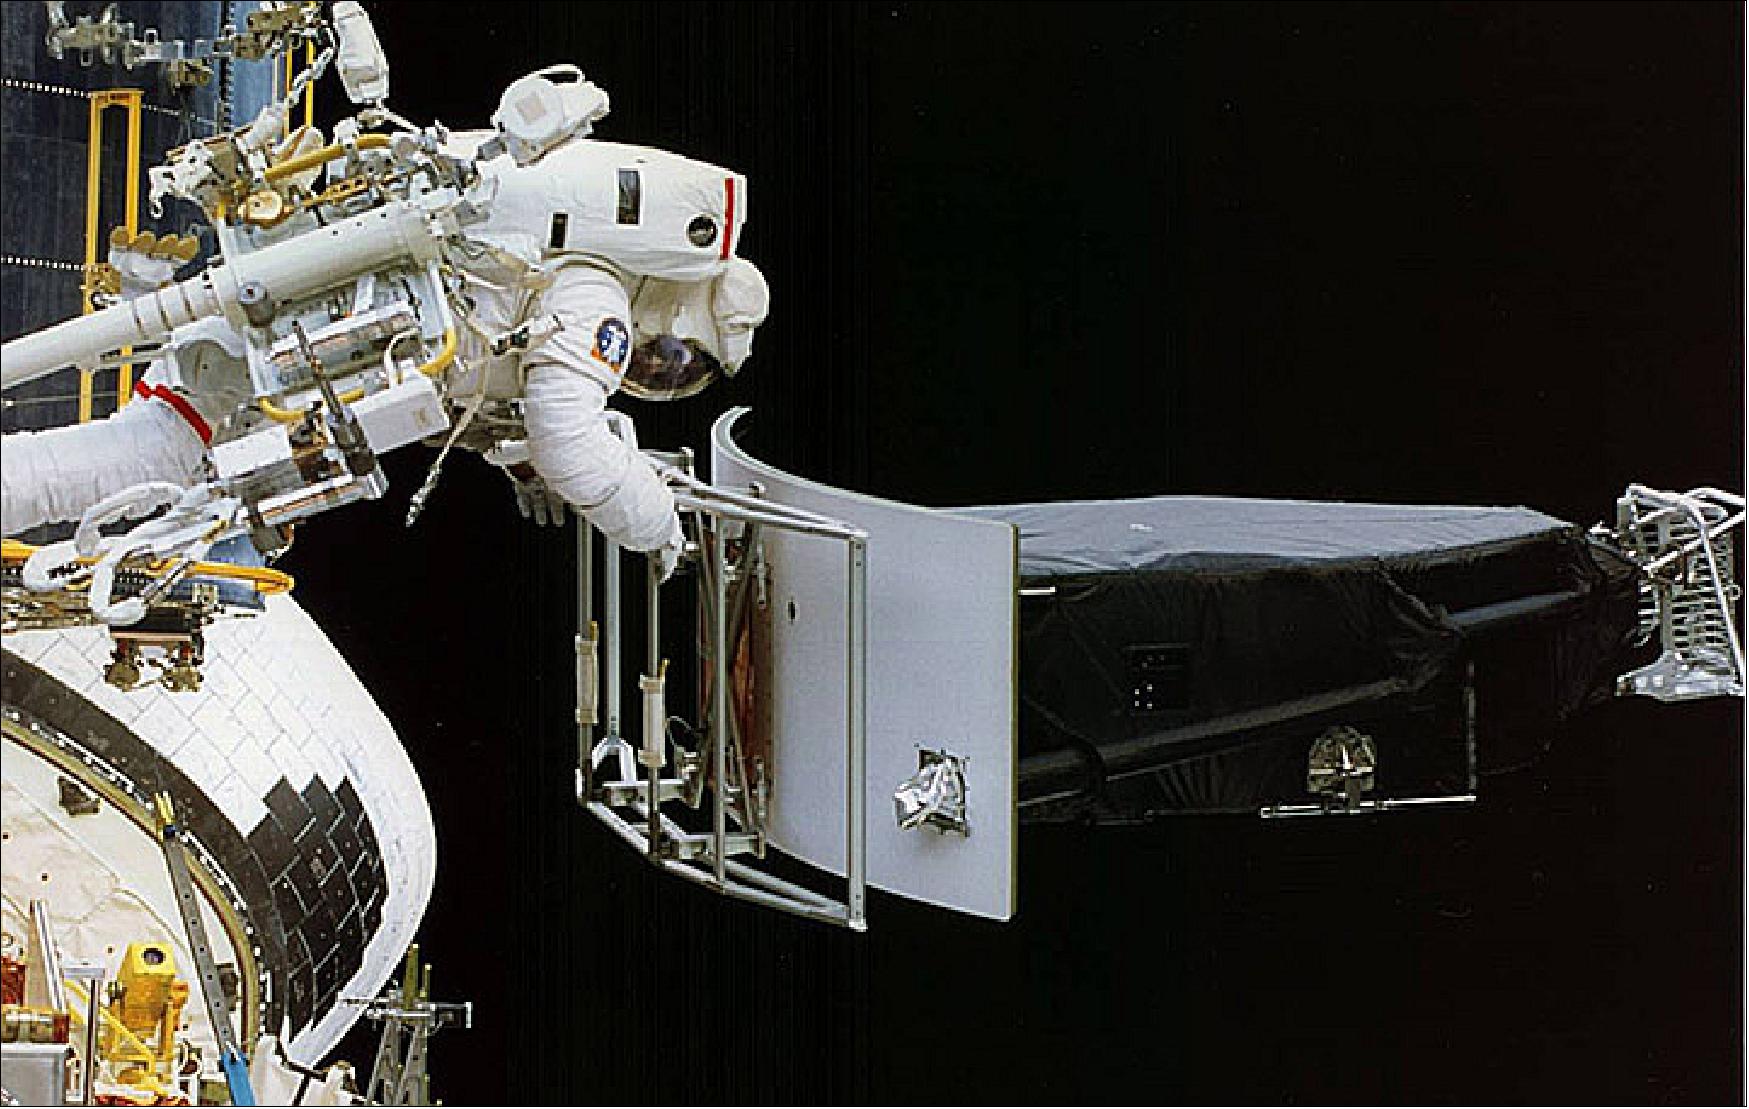 Figure 4: Replacing the Wide Field and Planetary Camera. Astronaut Jeffrey Hoffman removes Wide Field and Planetary Camera 1 (WFPC 1) during change-out operations (image credit: NASA)